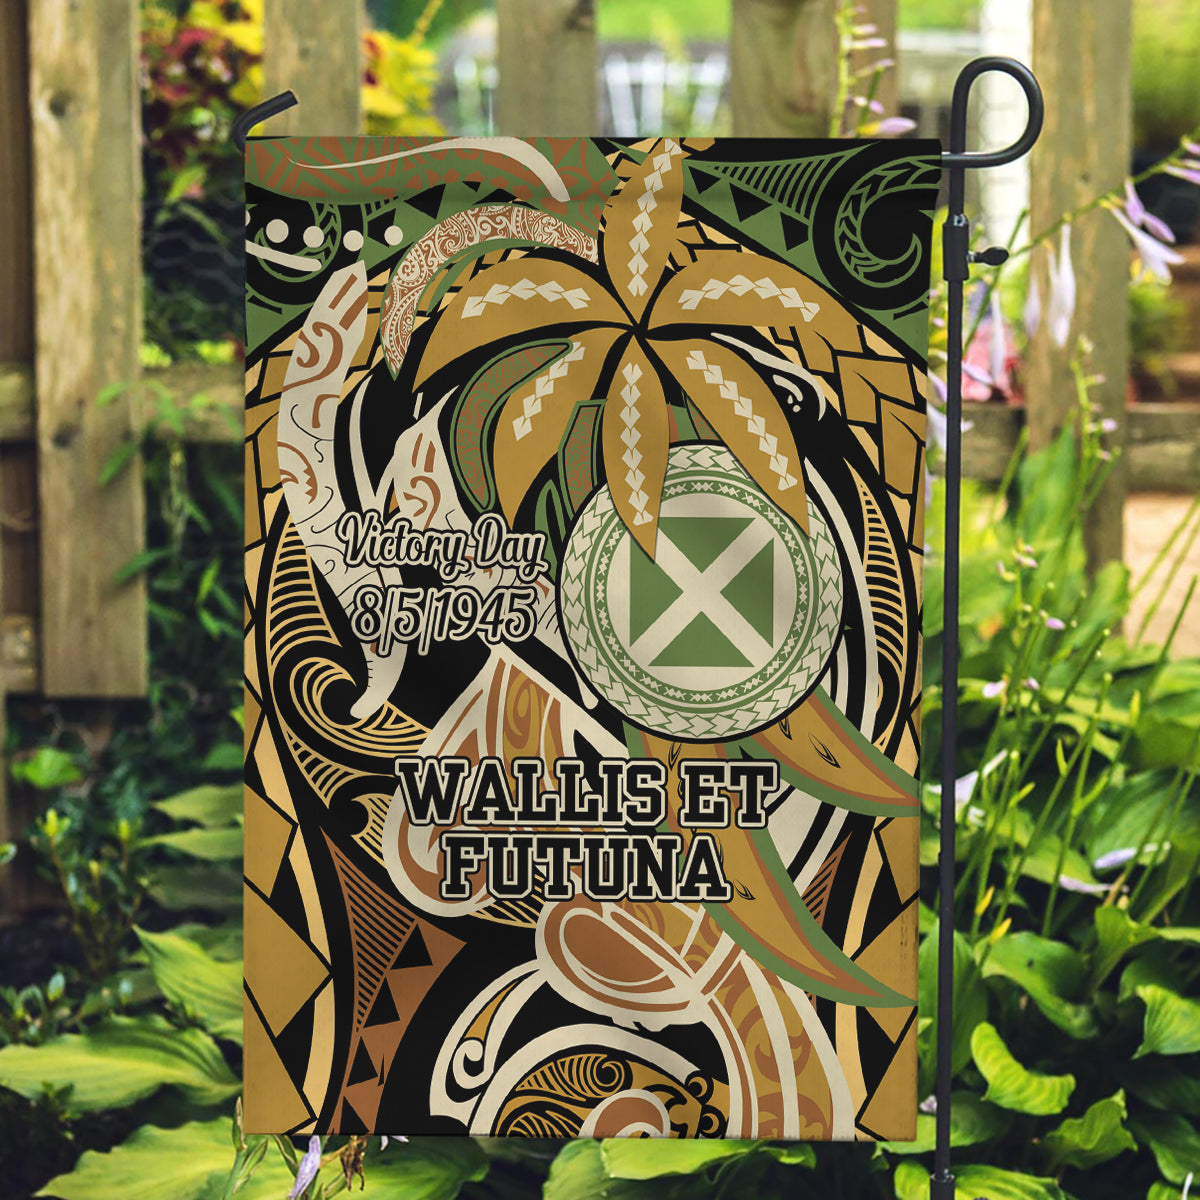 Wallis and Futuna Victory Day Garden Flag Since 1945 with Polynesian Platinum Floral Tribal